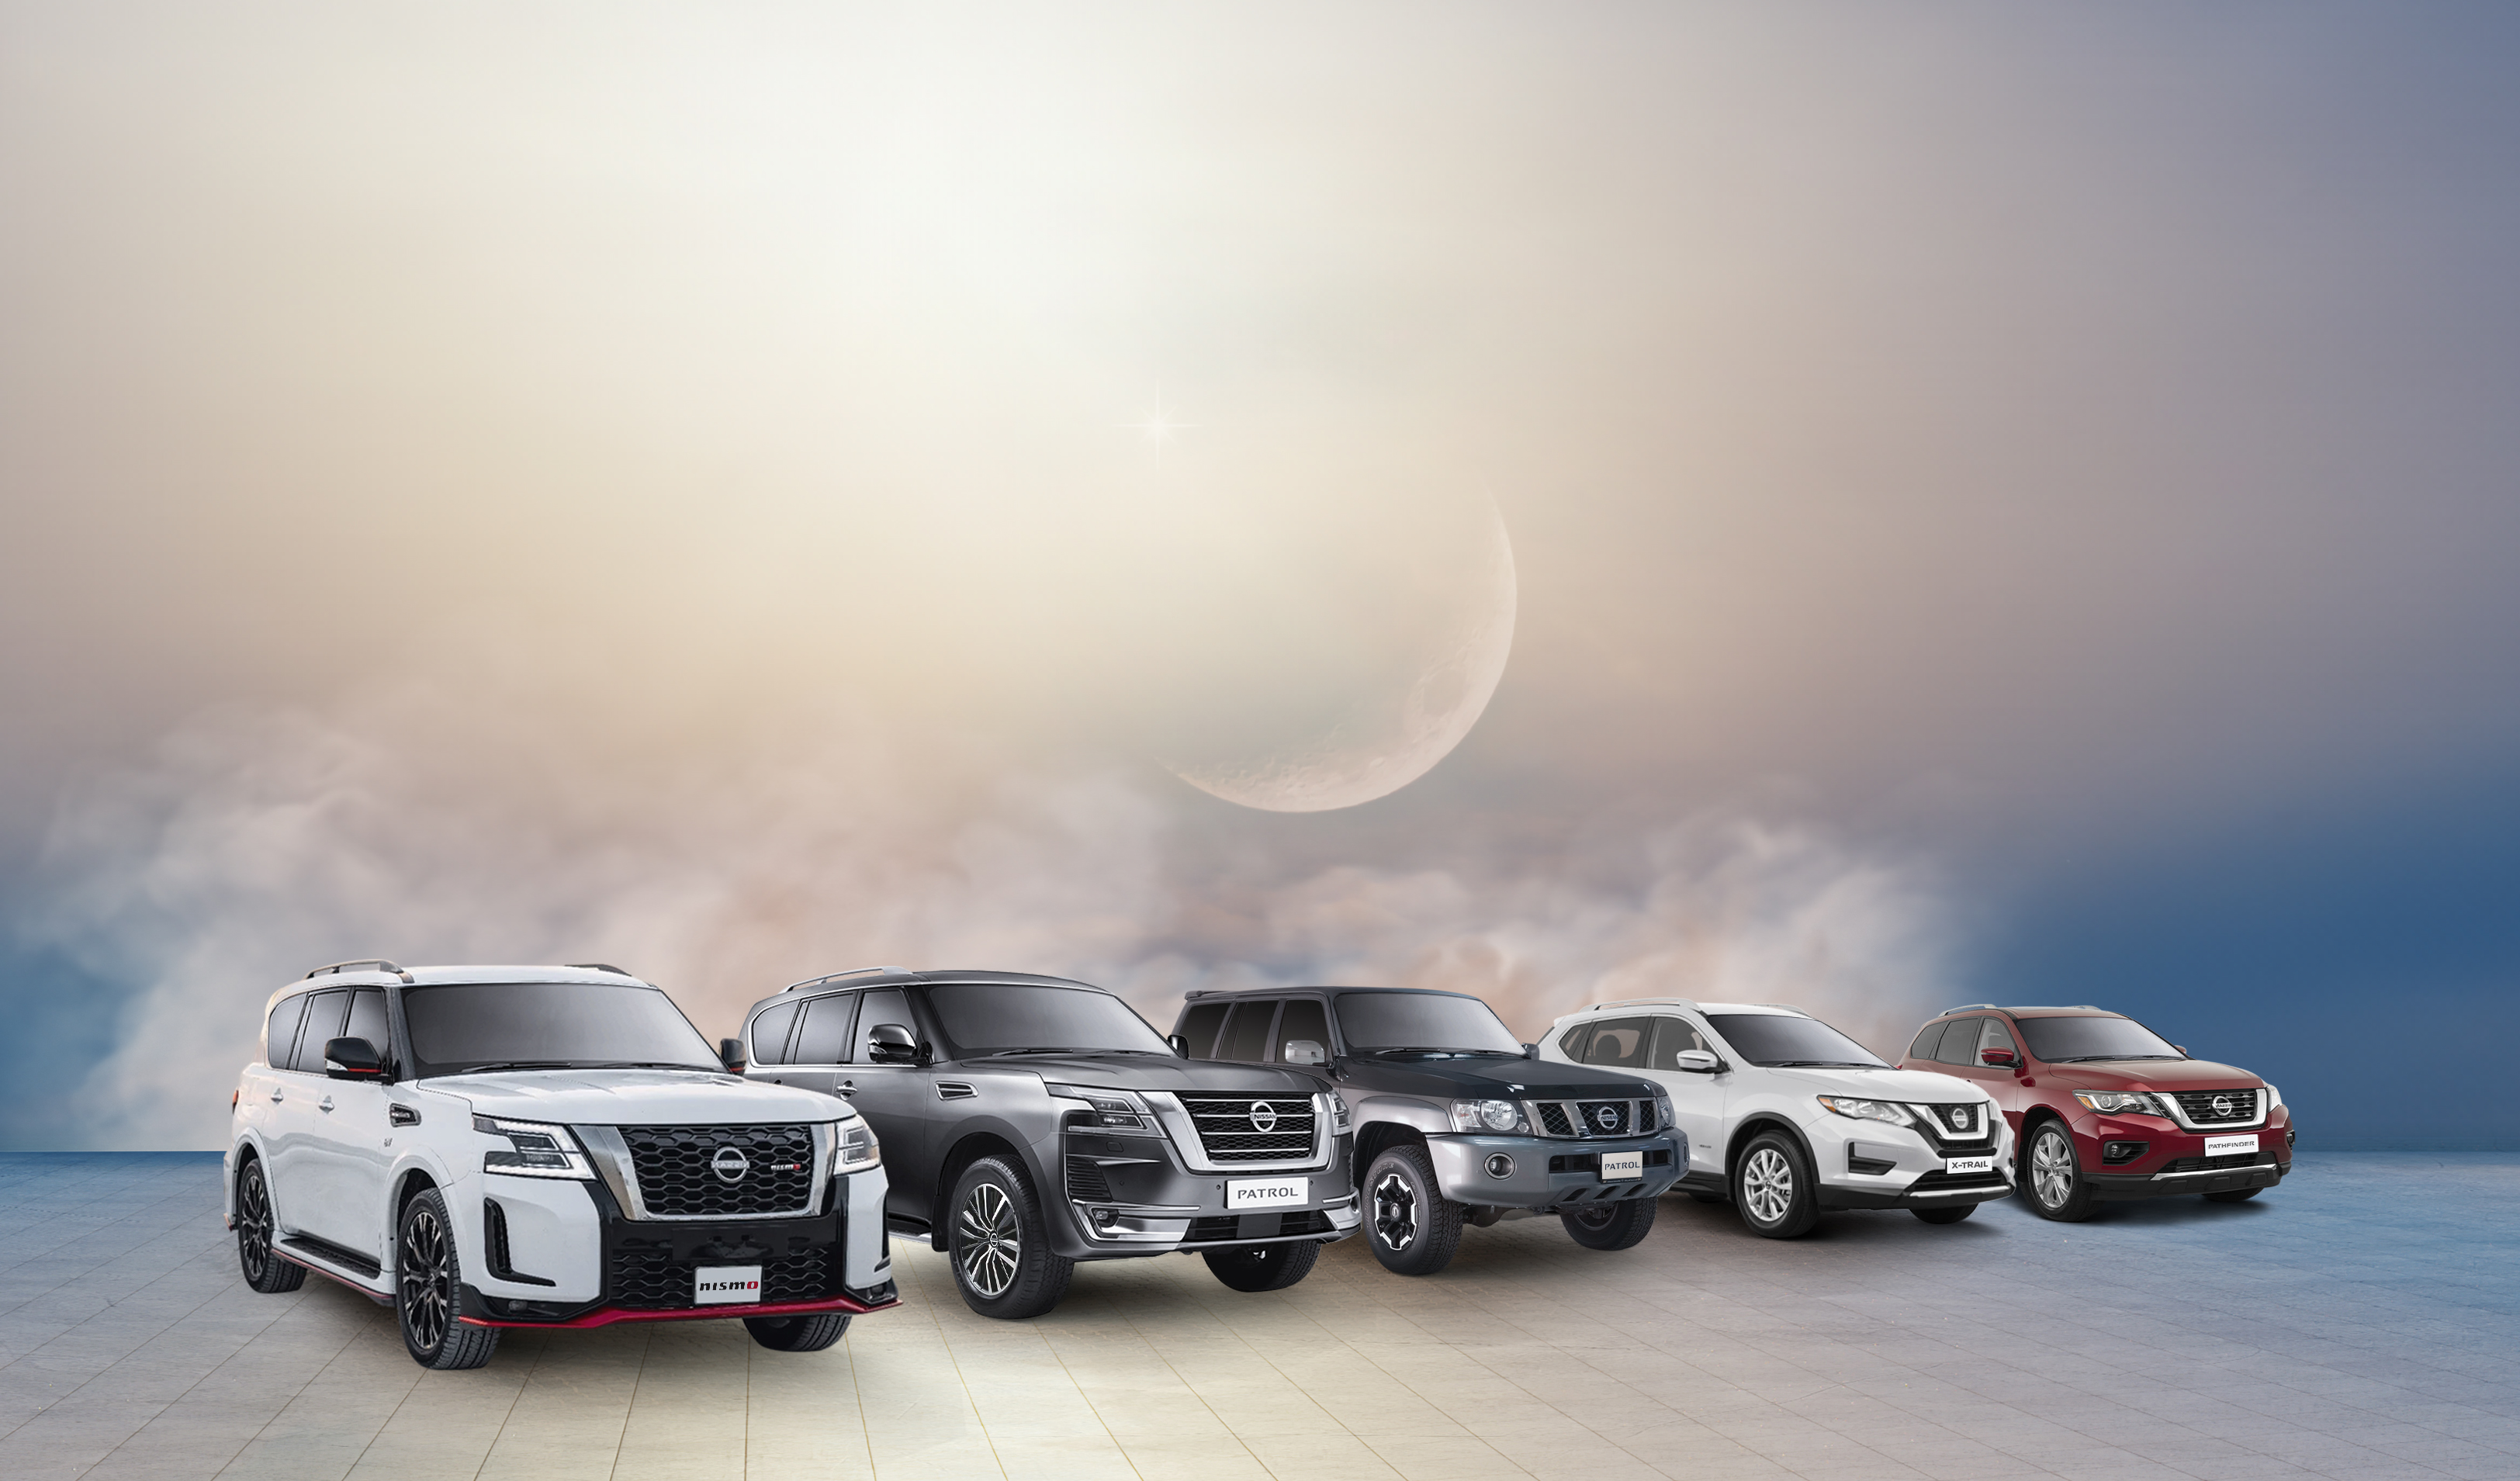 Al Masaood Automobiles Introduces Exclusive Eid Al Adha Offer on Nissan Certified Pre-Owned Nissan Vehicles